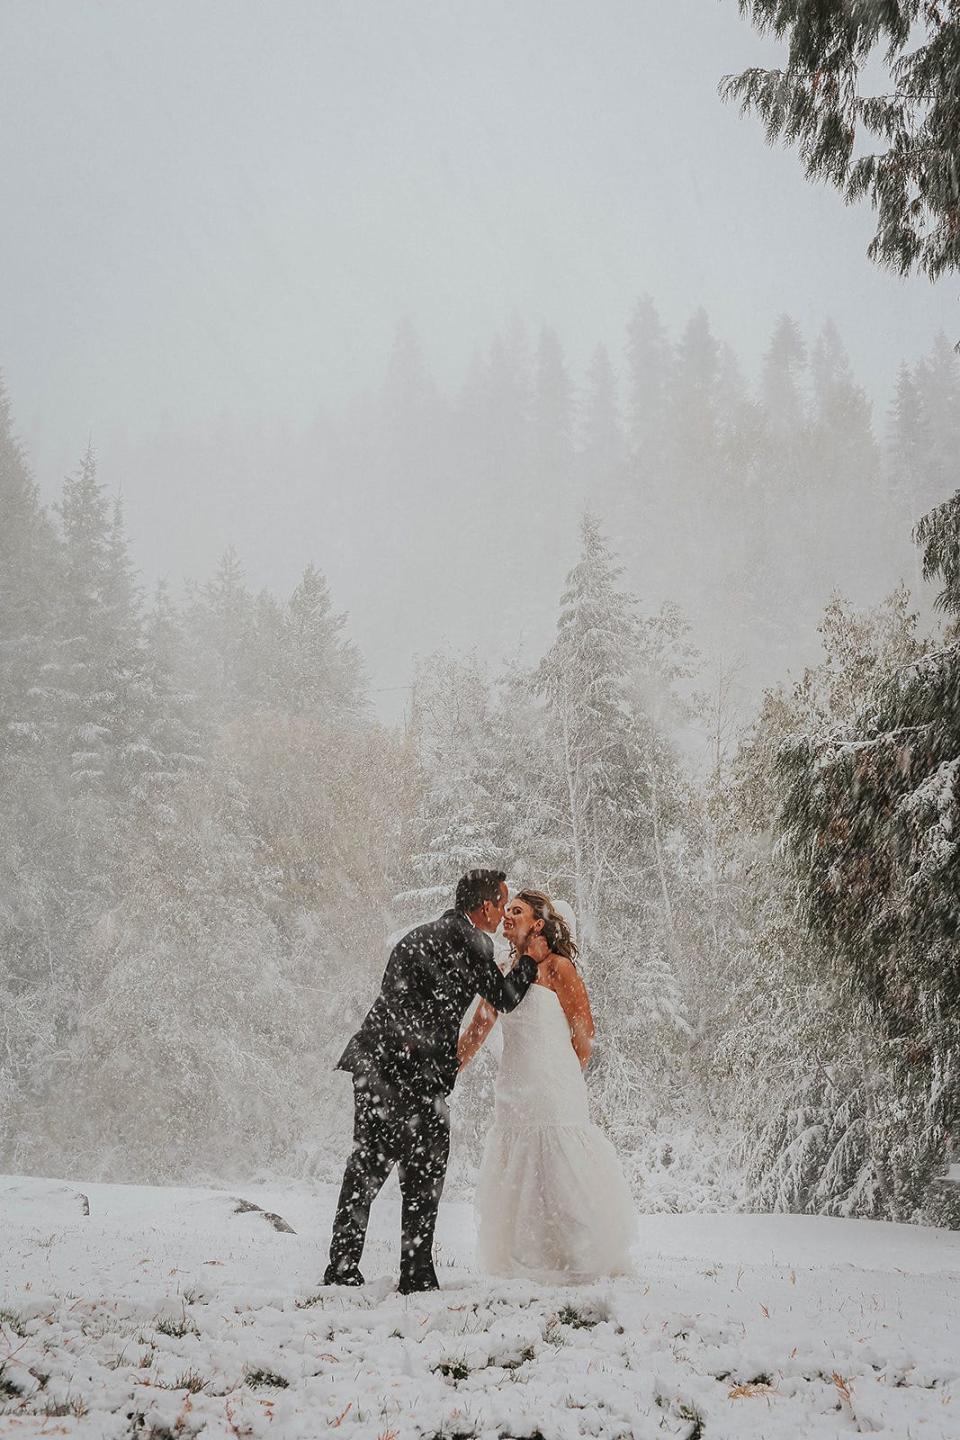 Sean and Brittany Tuohy were planning for an outdoor fall wedding in Washington. Instead, they got hit with a snowstorm on Sept. 28. Photographer Jaime Fletcher captured some unique photos of the occasion.